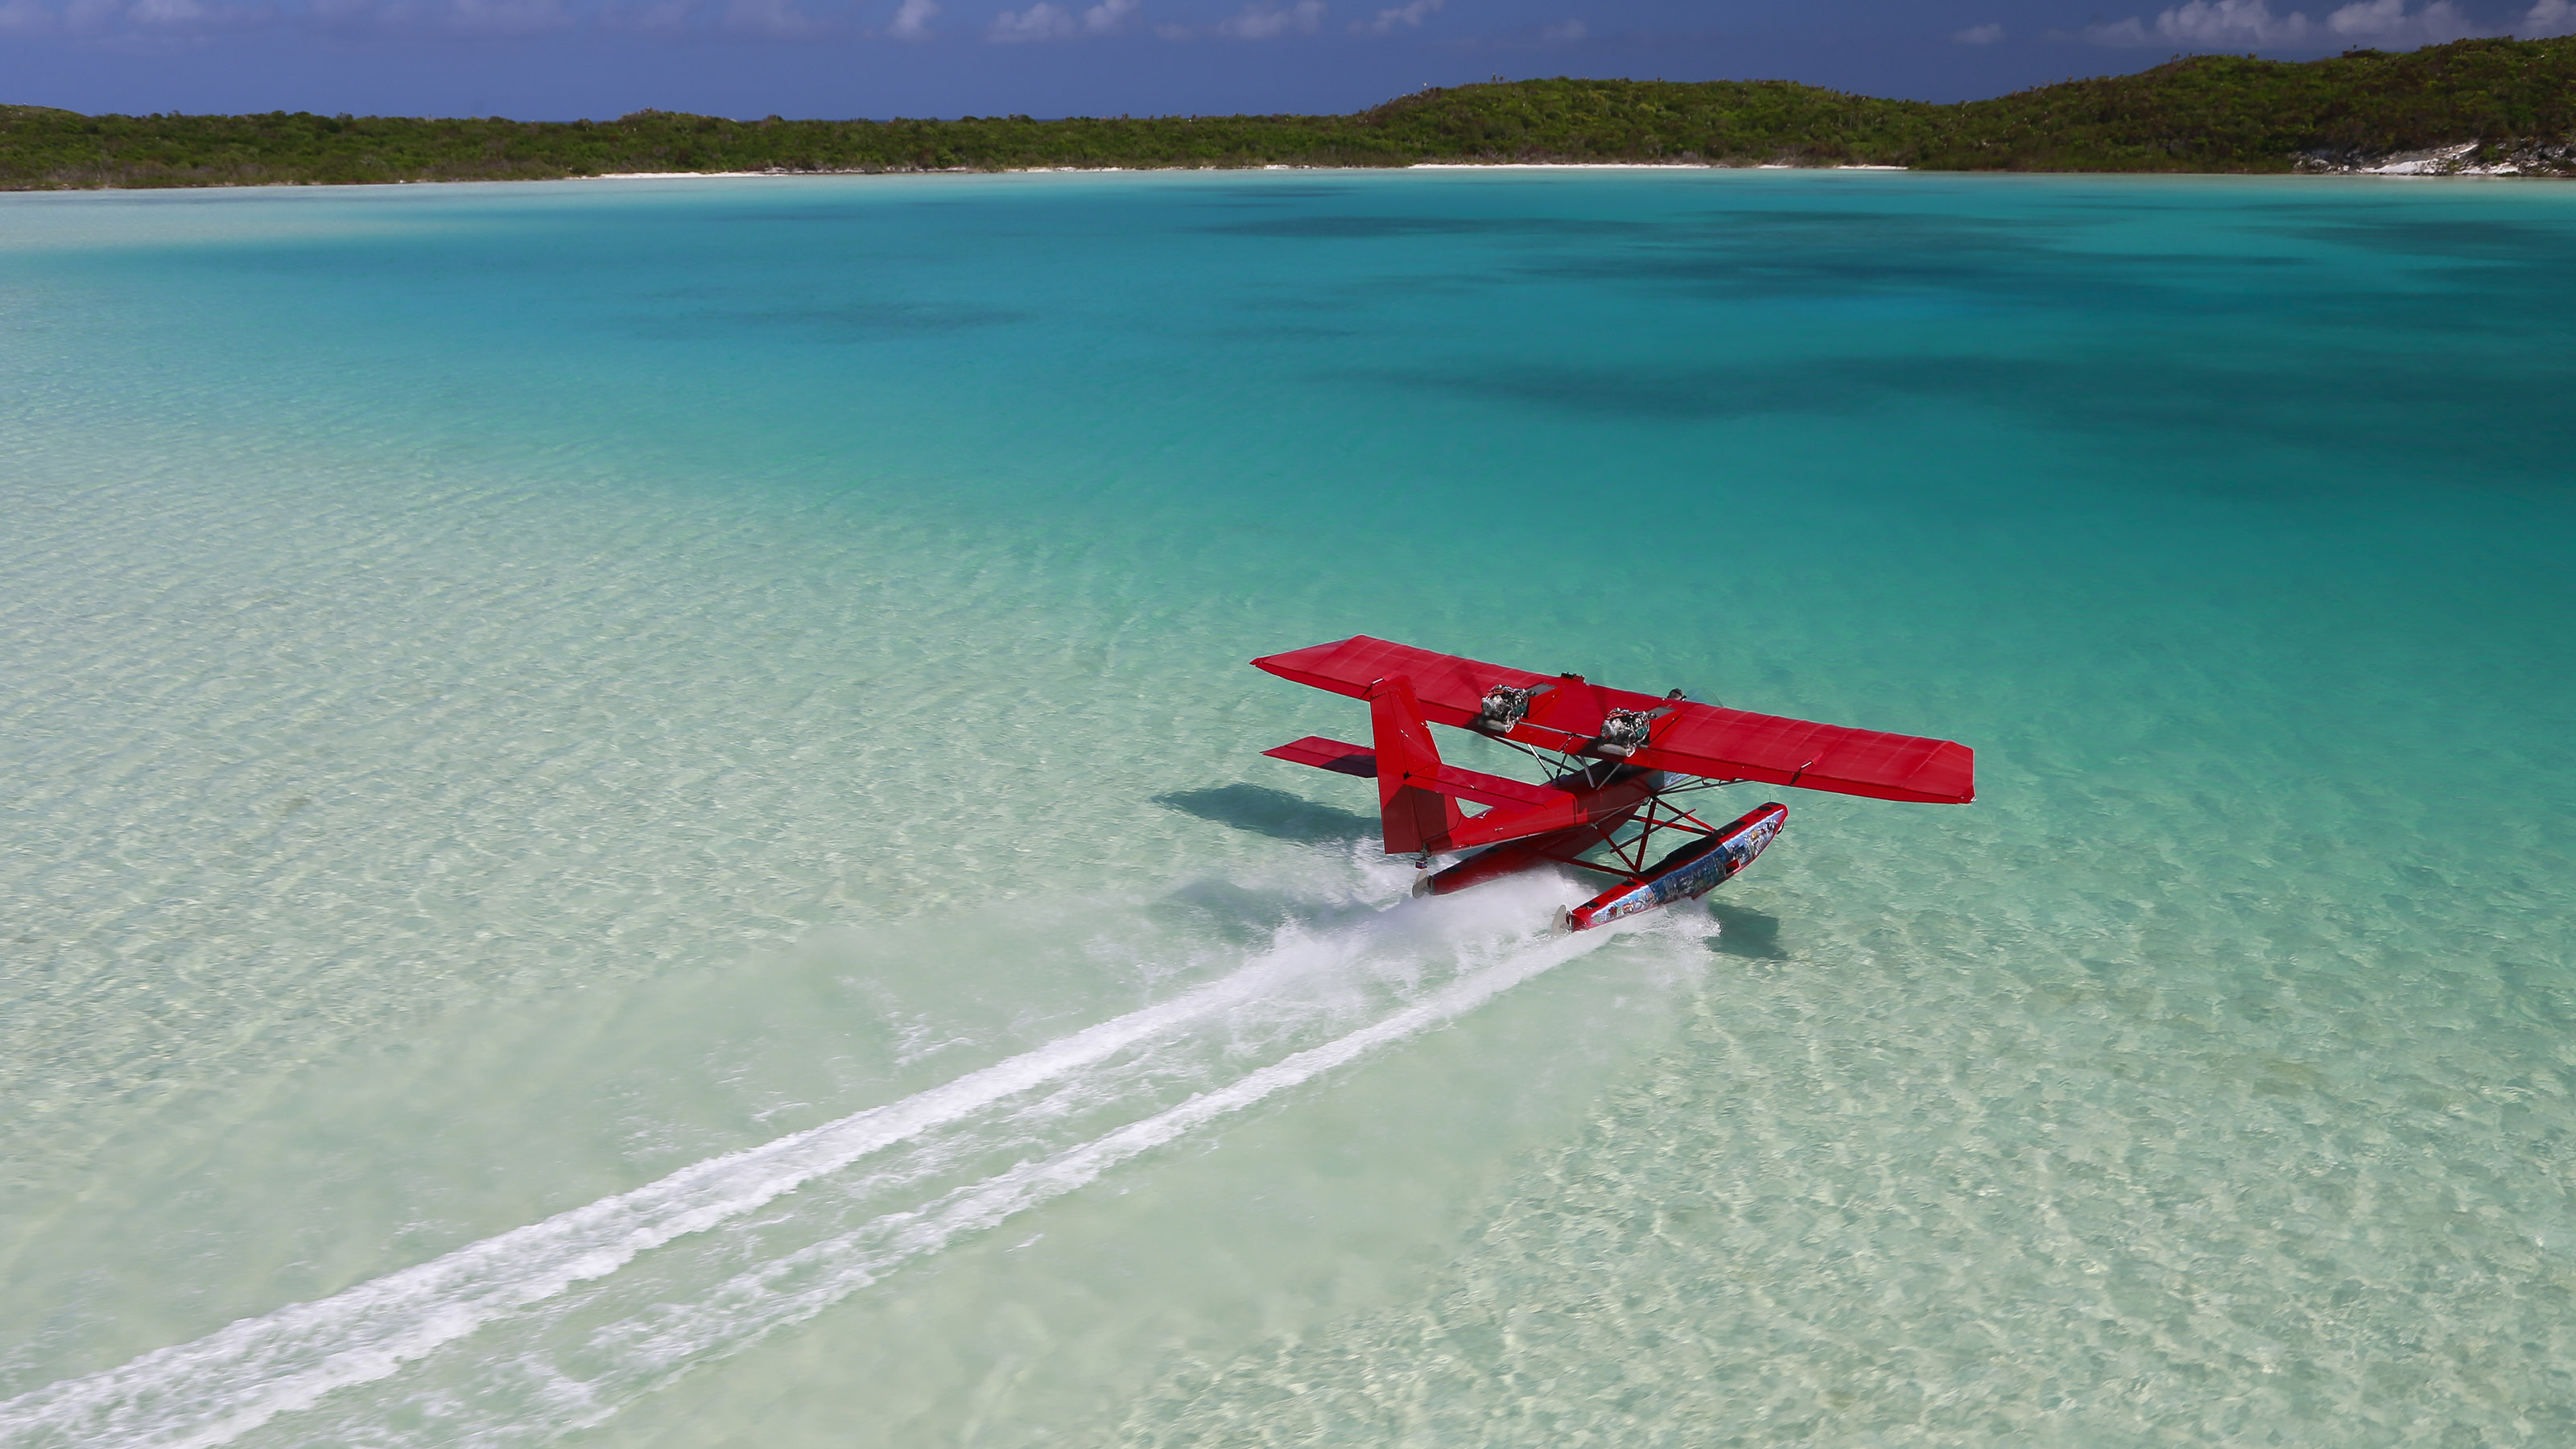 It’s hard to beat the intimate view an AirCam can give you of the turquoise water and white-sand beaches in the Bahamas. Photography by Chris Rose.